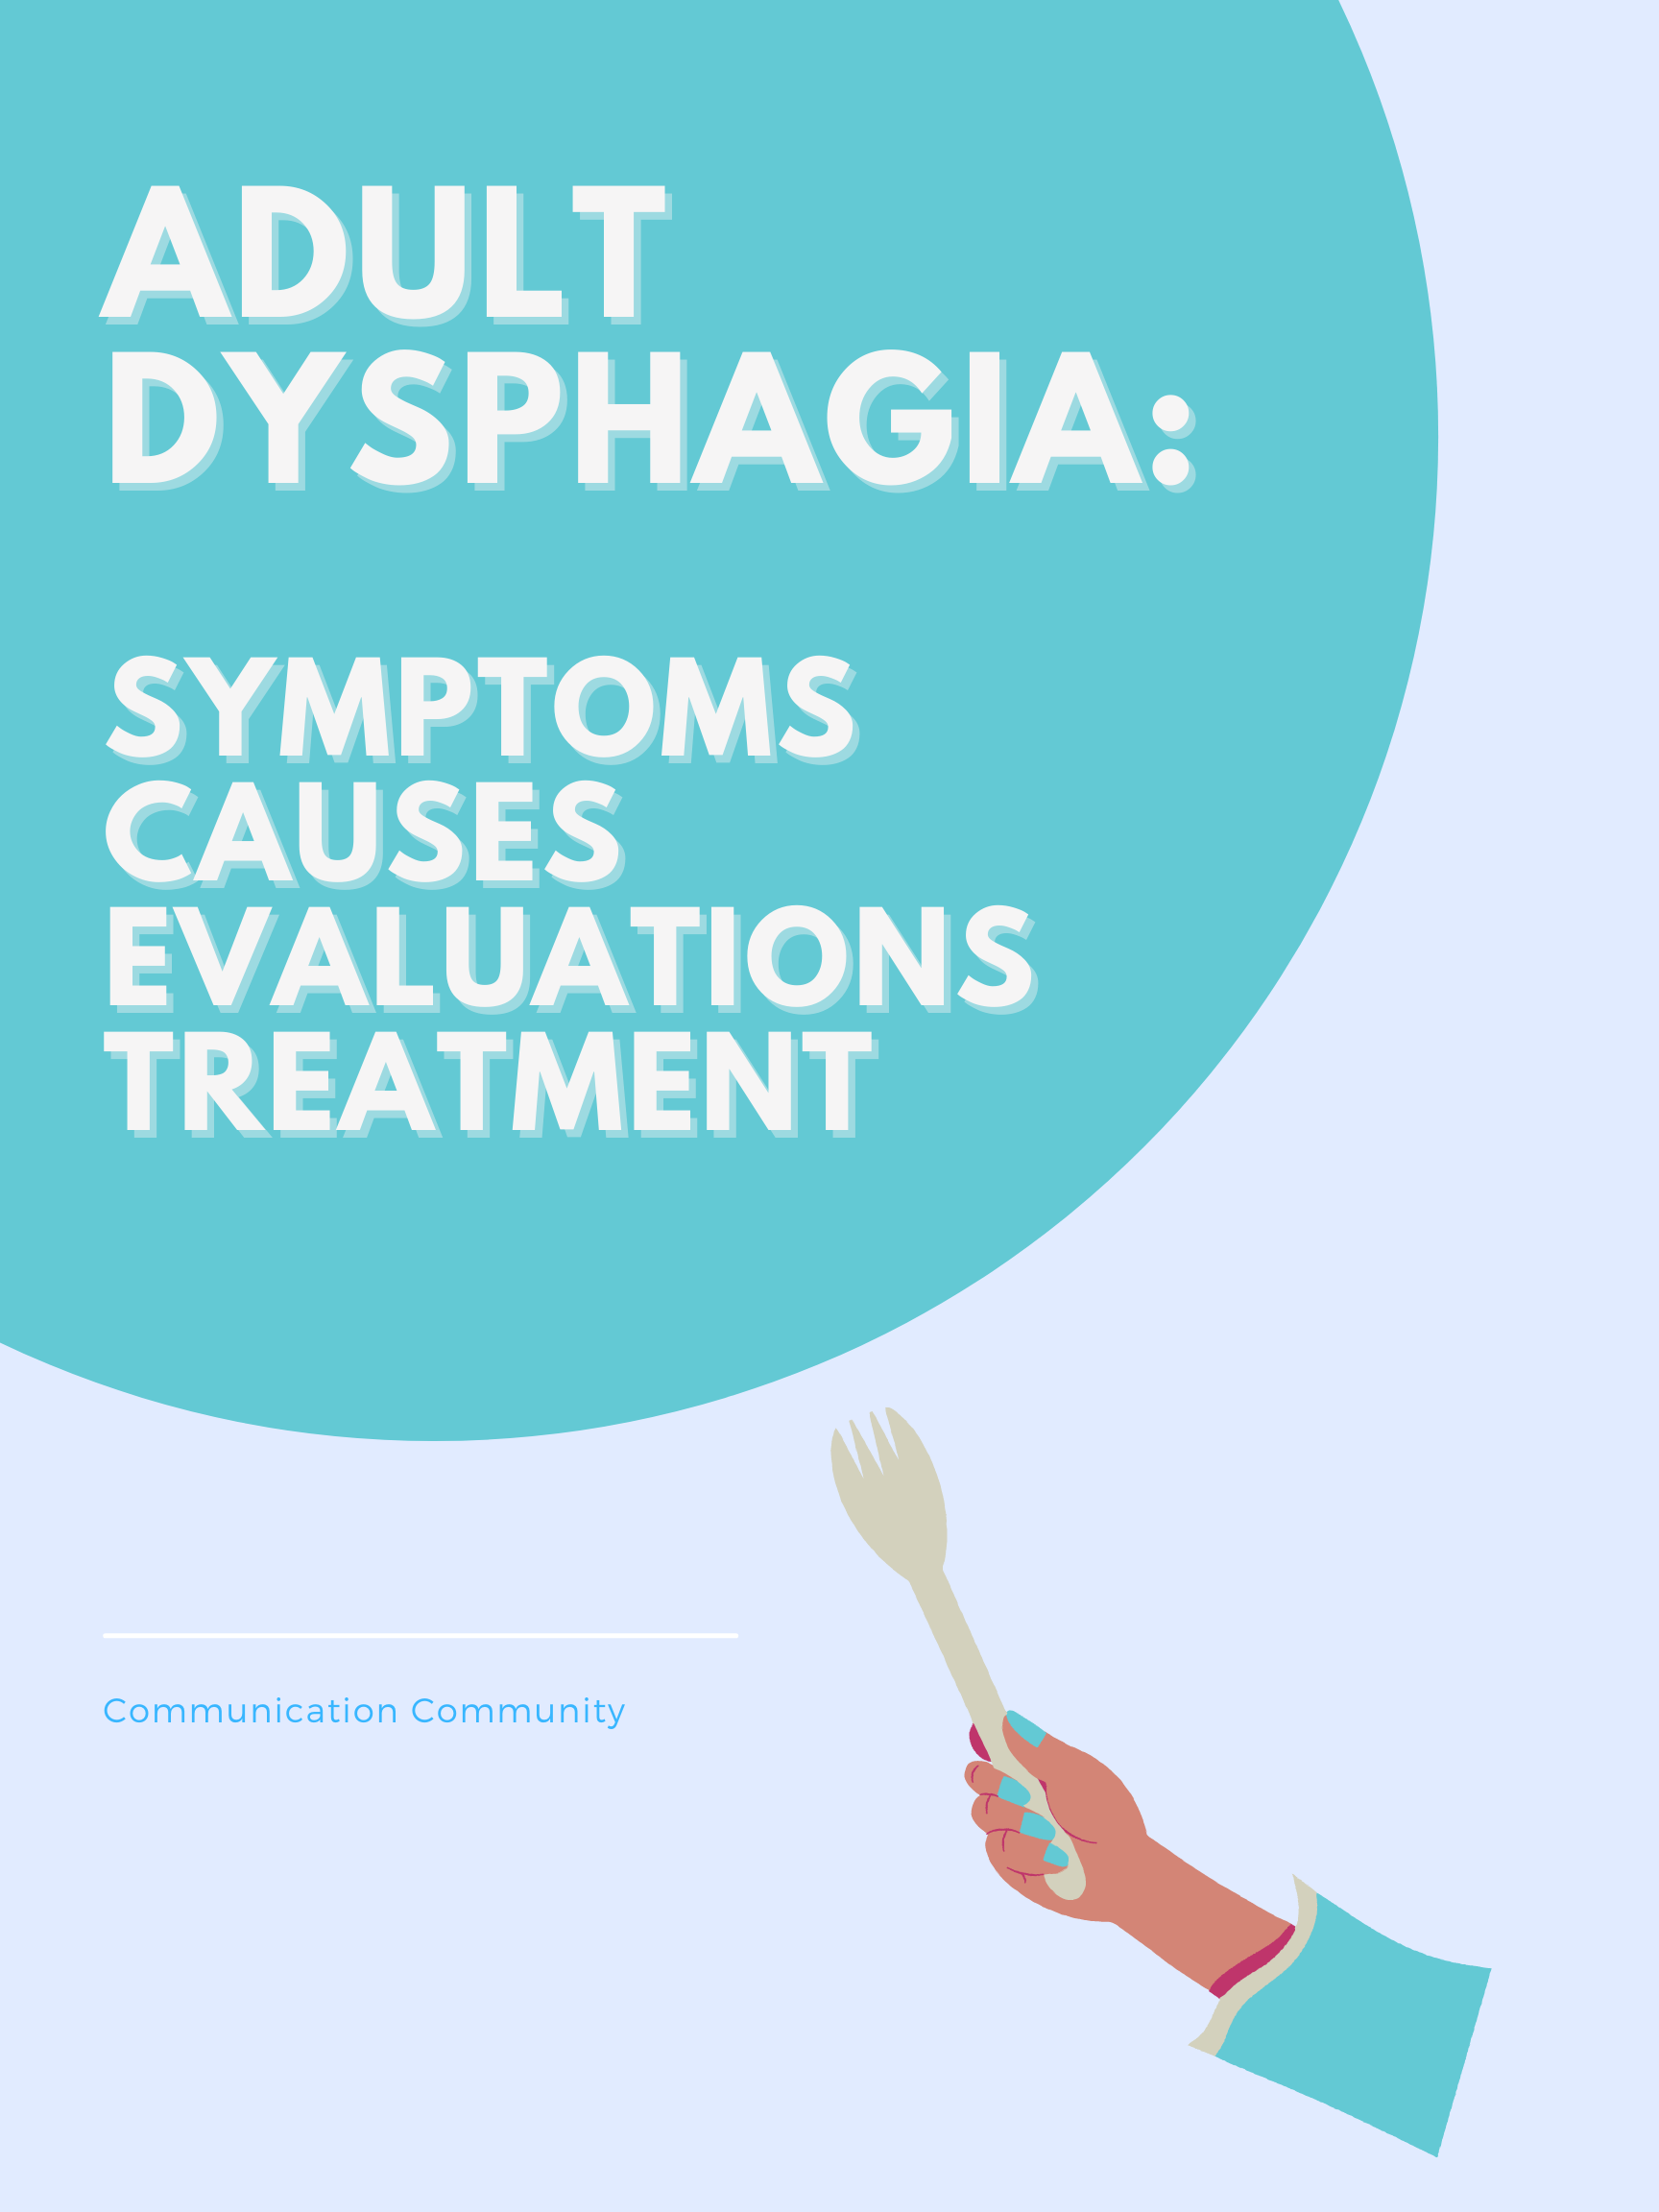 What is Adult Dysphagia (Difficulty Swallowing)? The Symptoms, Causes, Evaluations, and Treatment Options